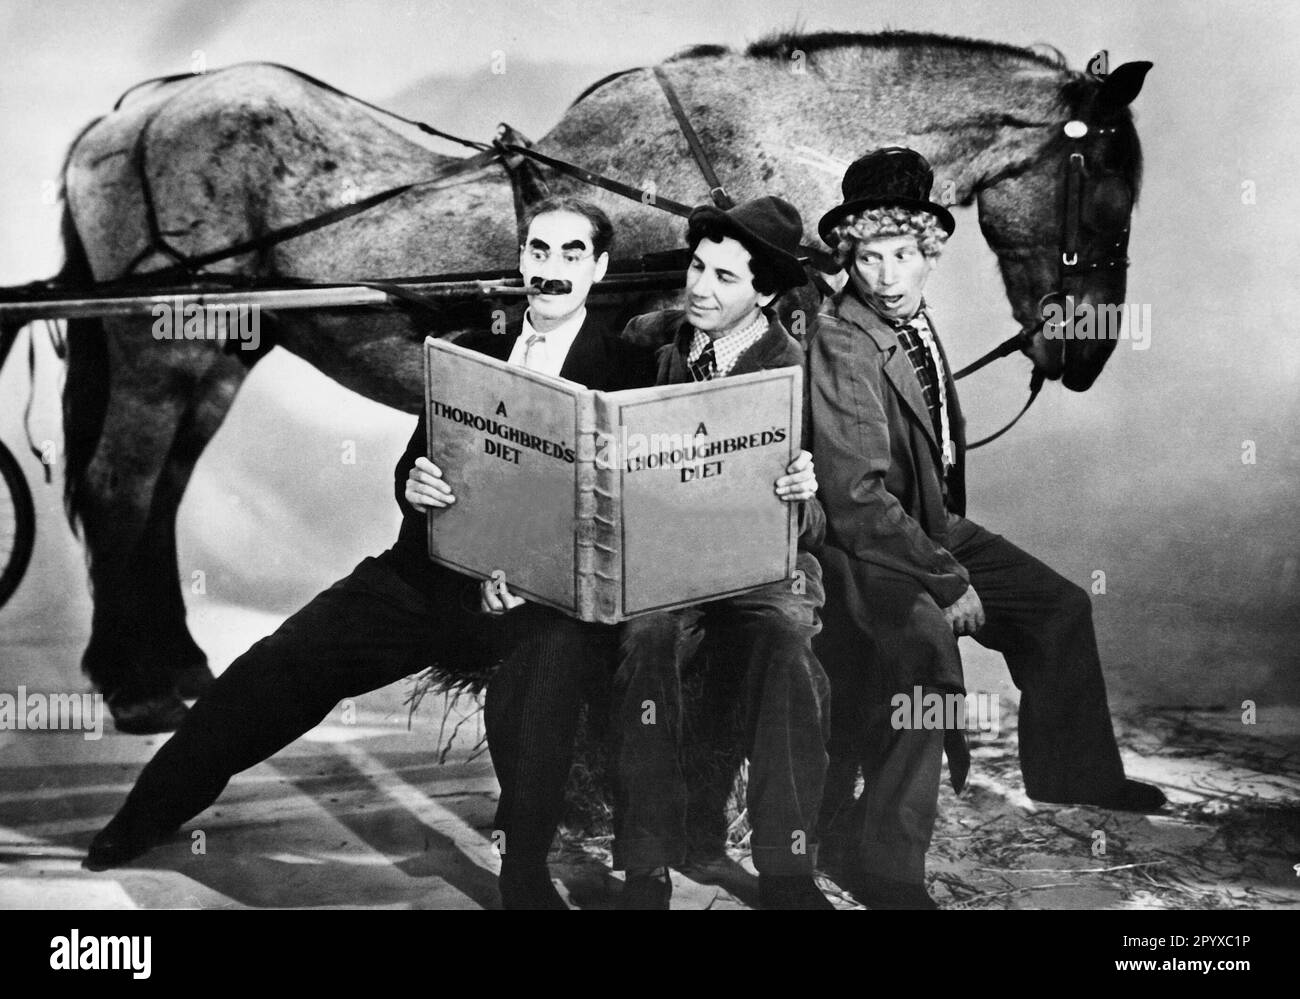 Groucho, Chico and Harpo Marx in 'The Marx Brothers: A Day at the Races'. Original title: 'A Day at the Races', directed by Sam Wood, USA 1937. [automated translation] Stock Photo